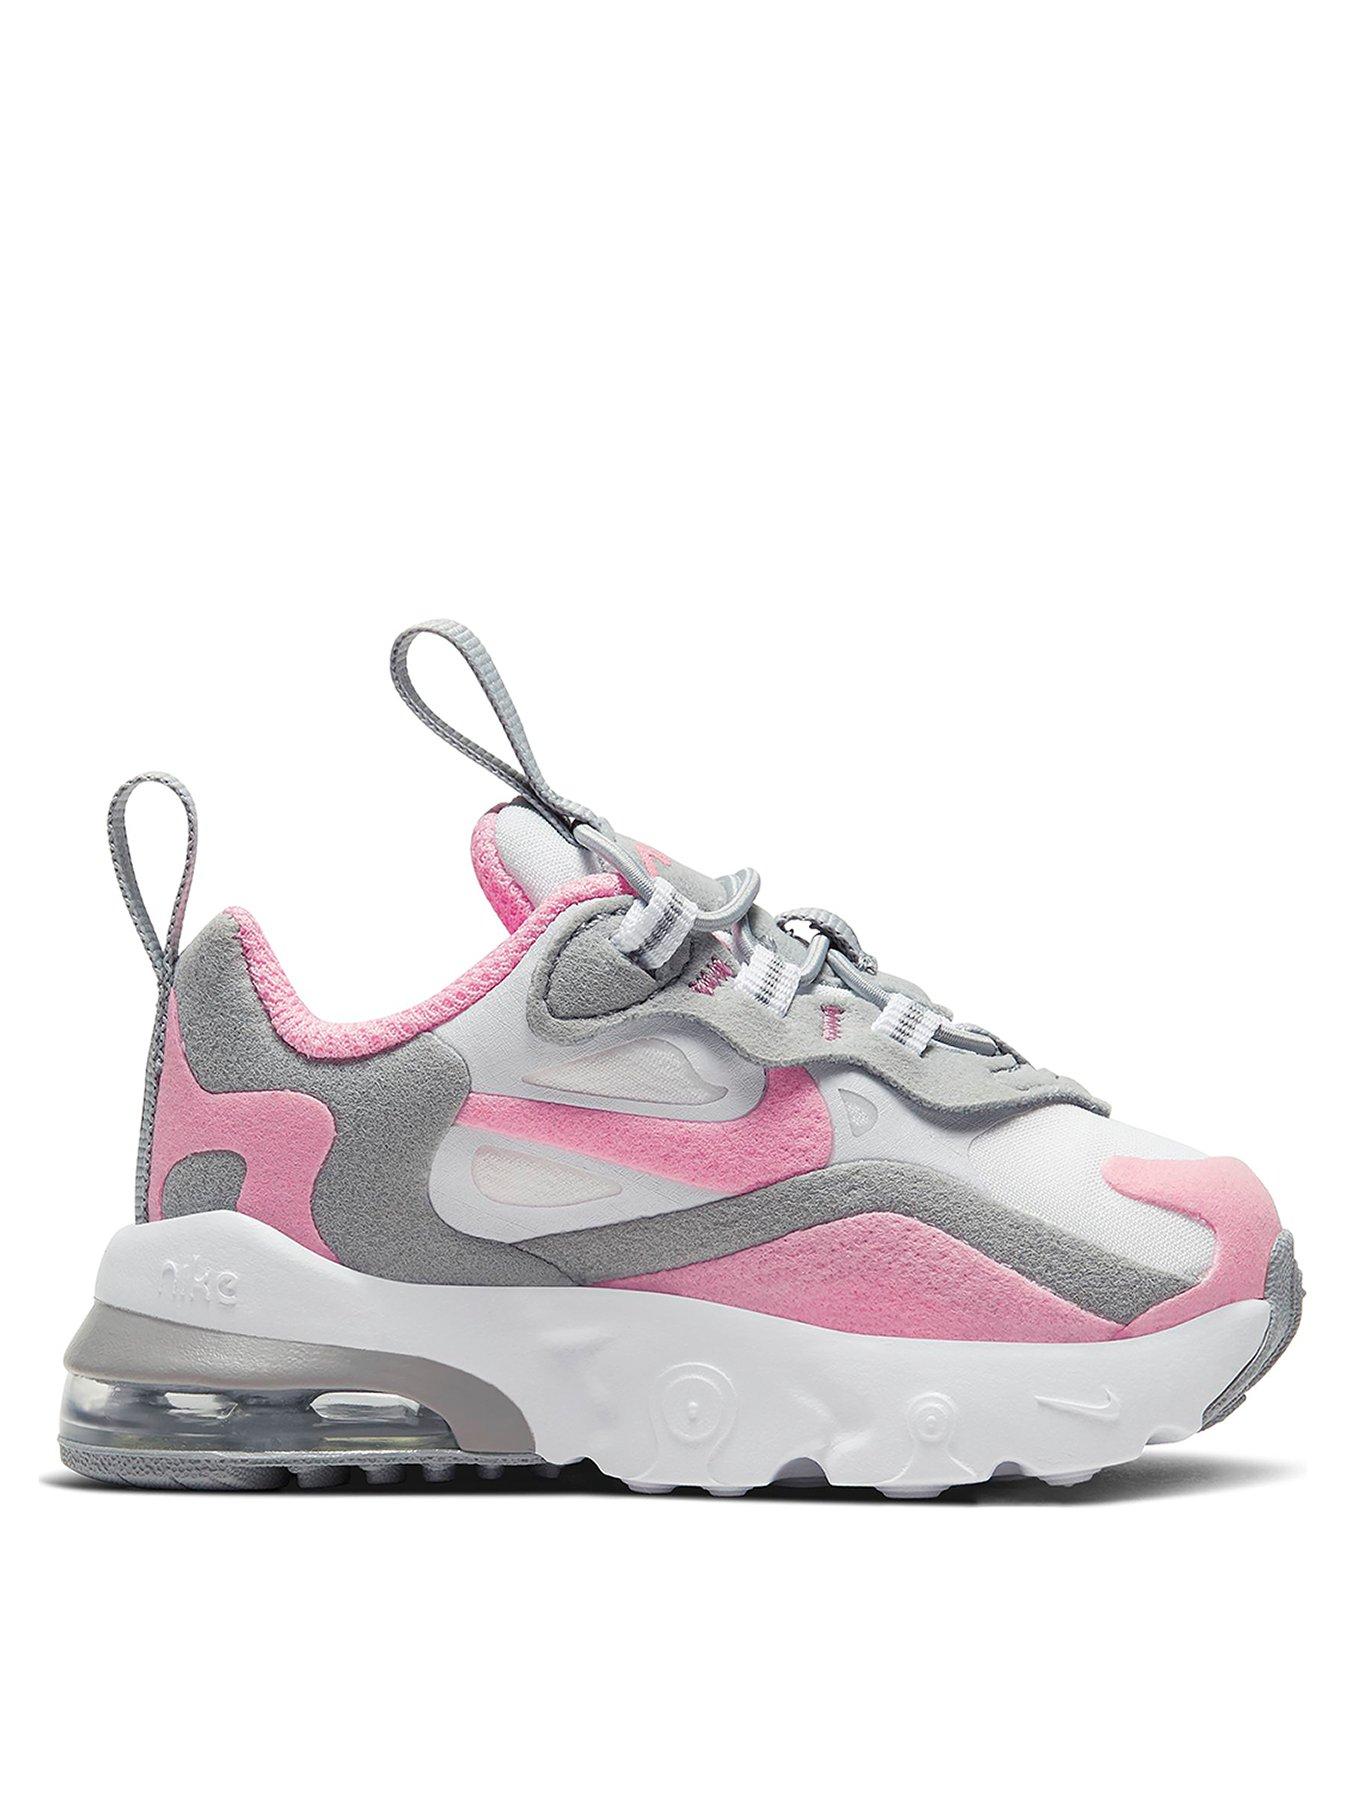 white & pink air max 270 knit trainers